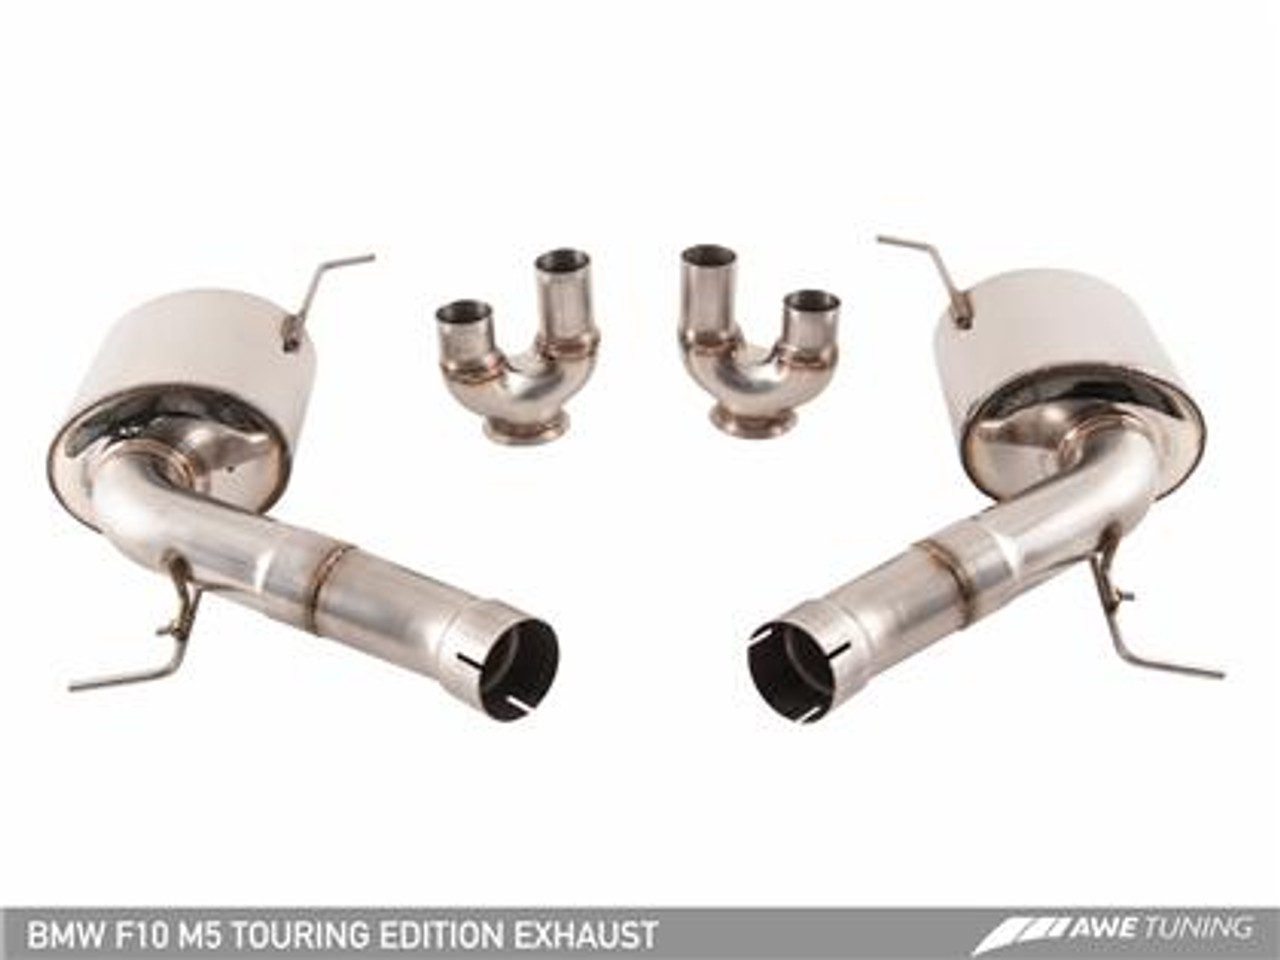 BMW Touring Edition Axle Back Exhaust with Chrome Silver Tips - AWE Tuning 3015-42062